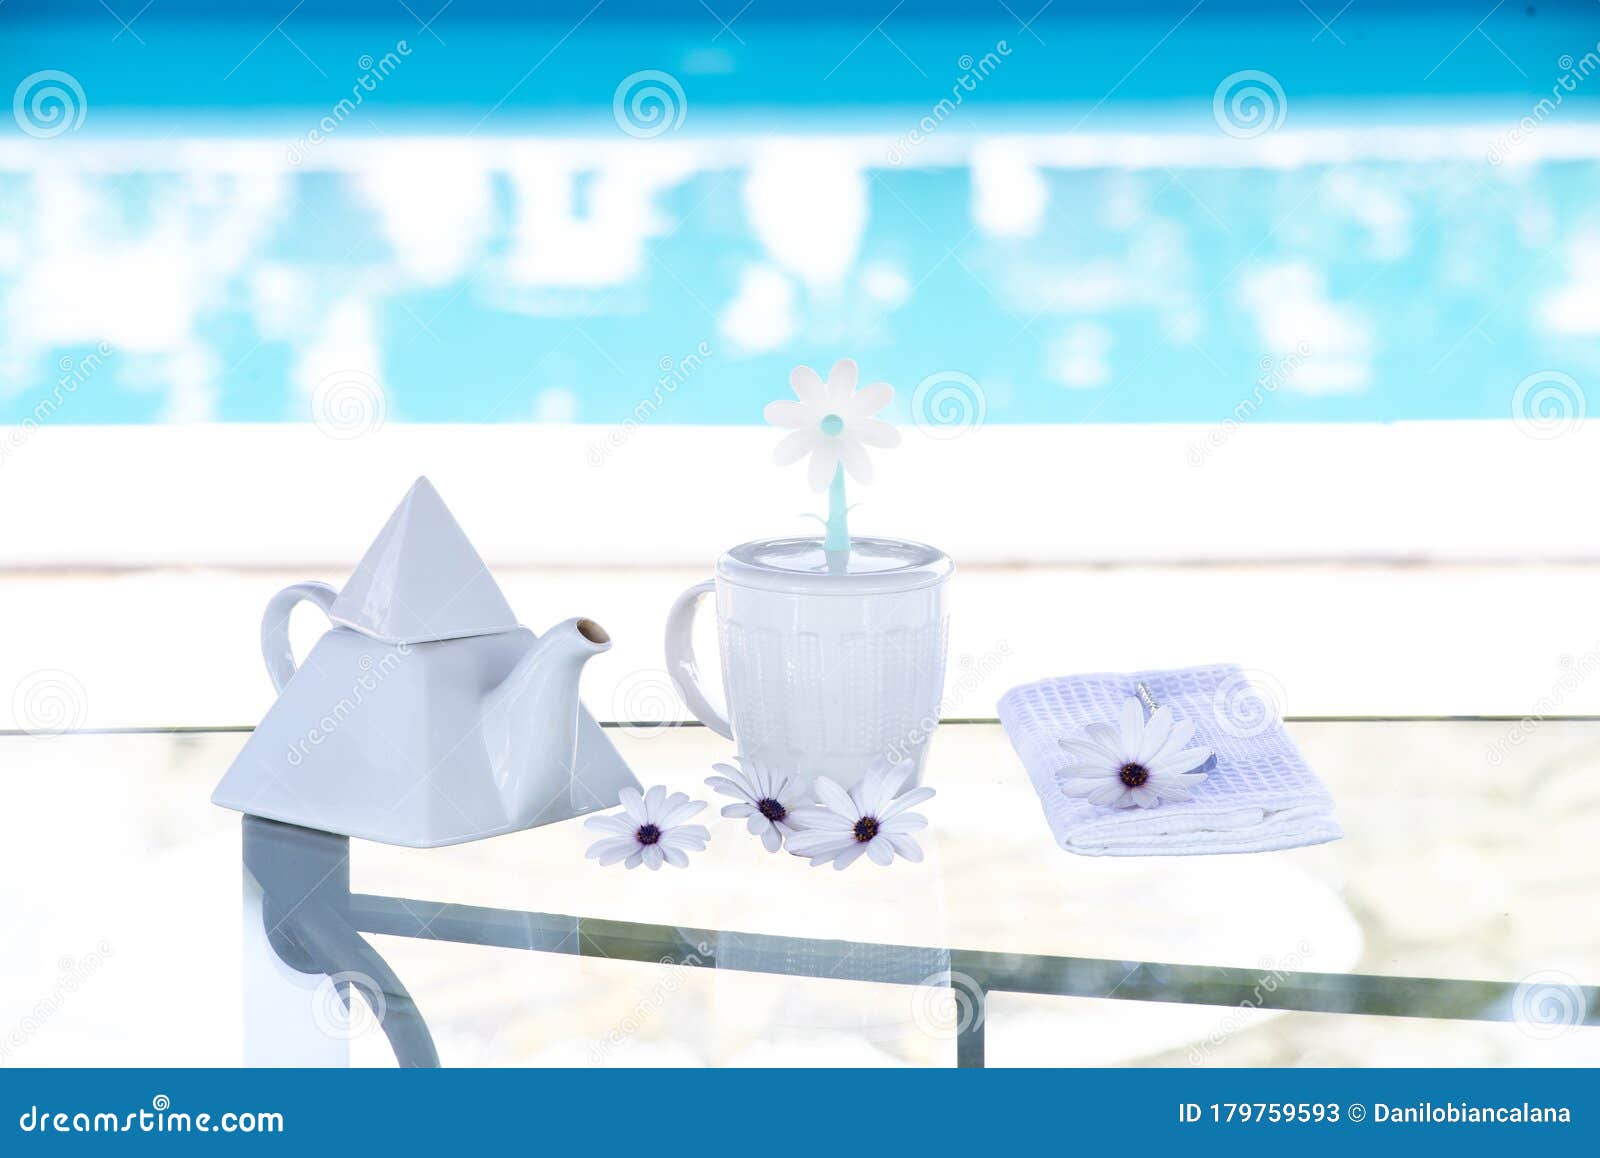 chamomile in the pool at breackfast morning